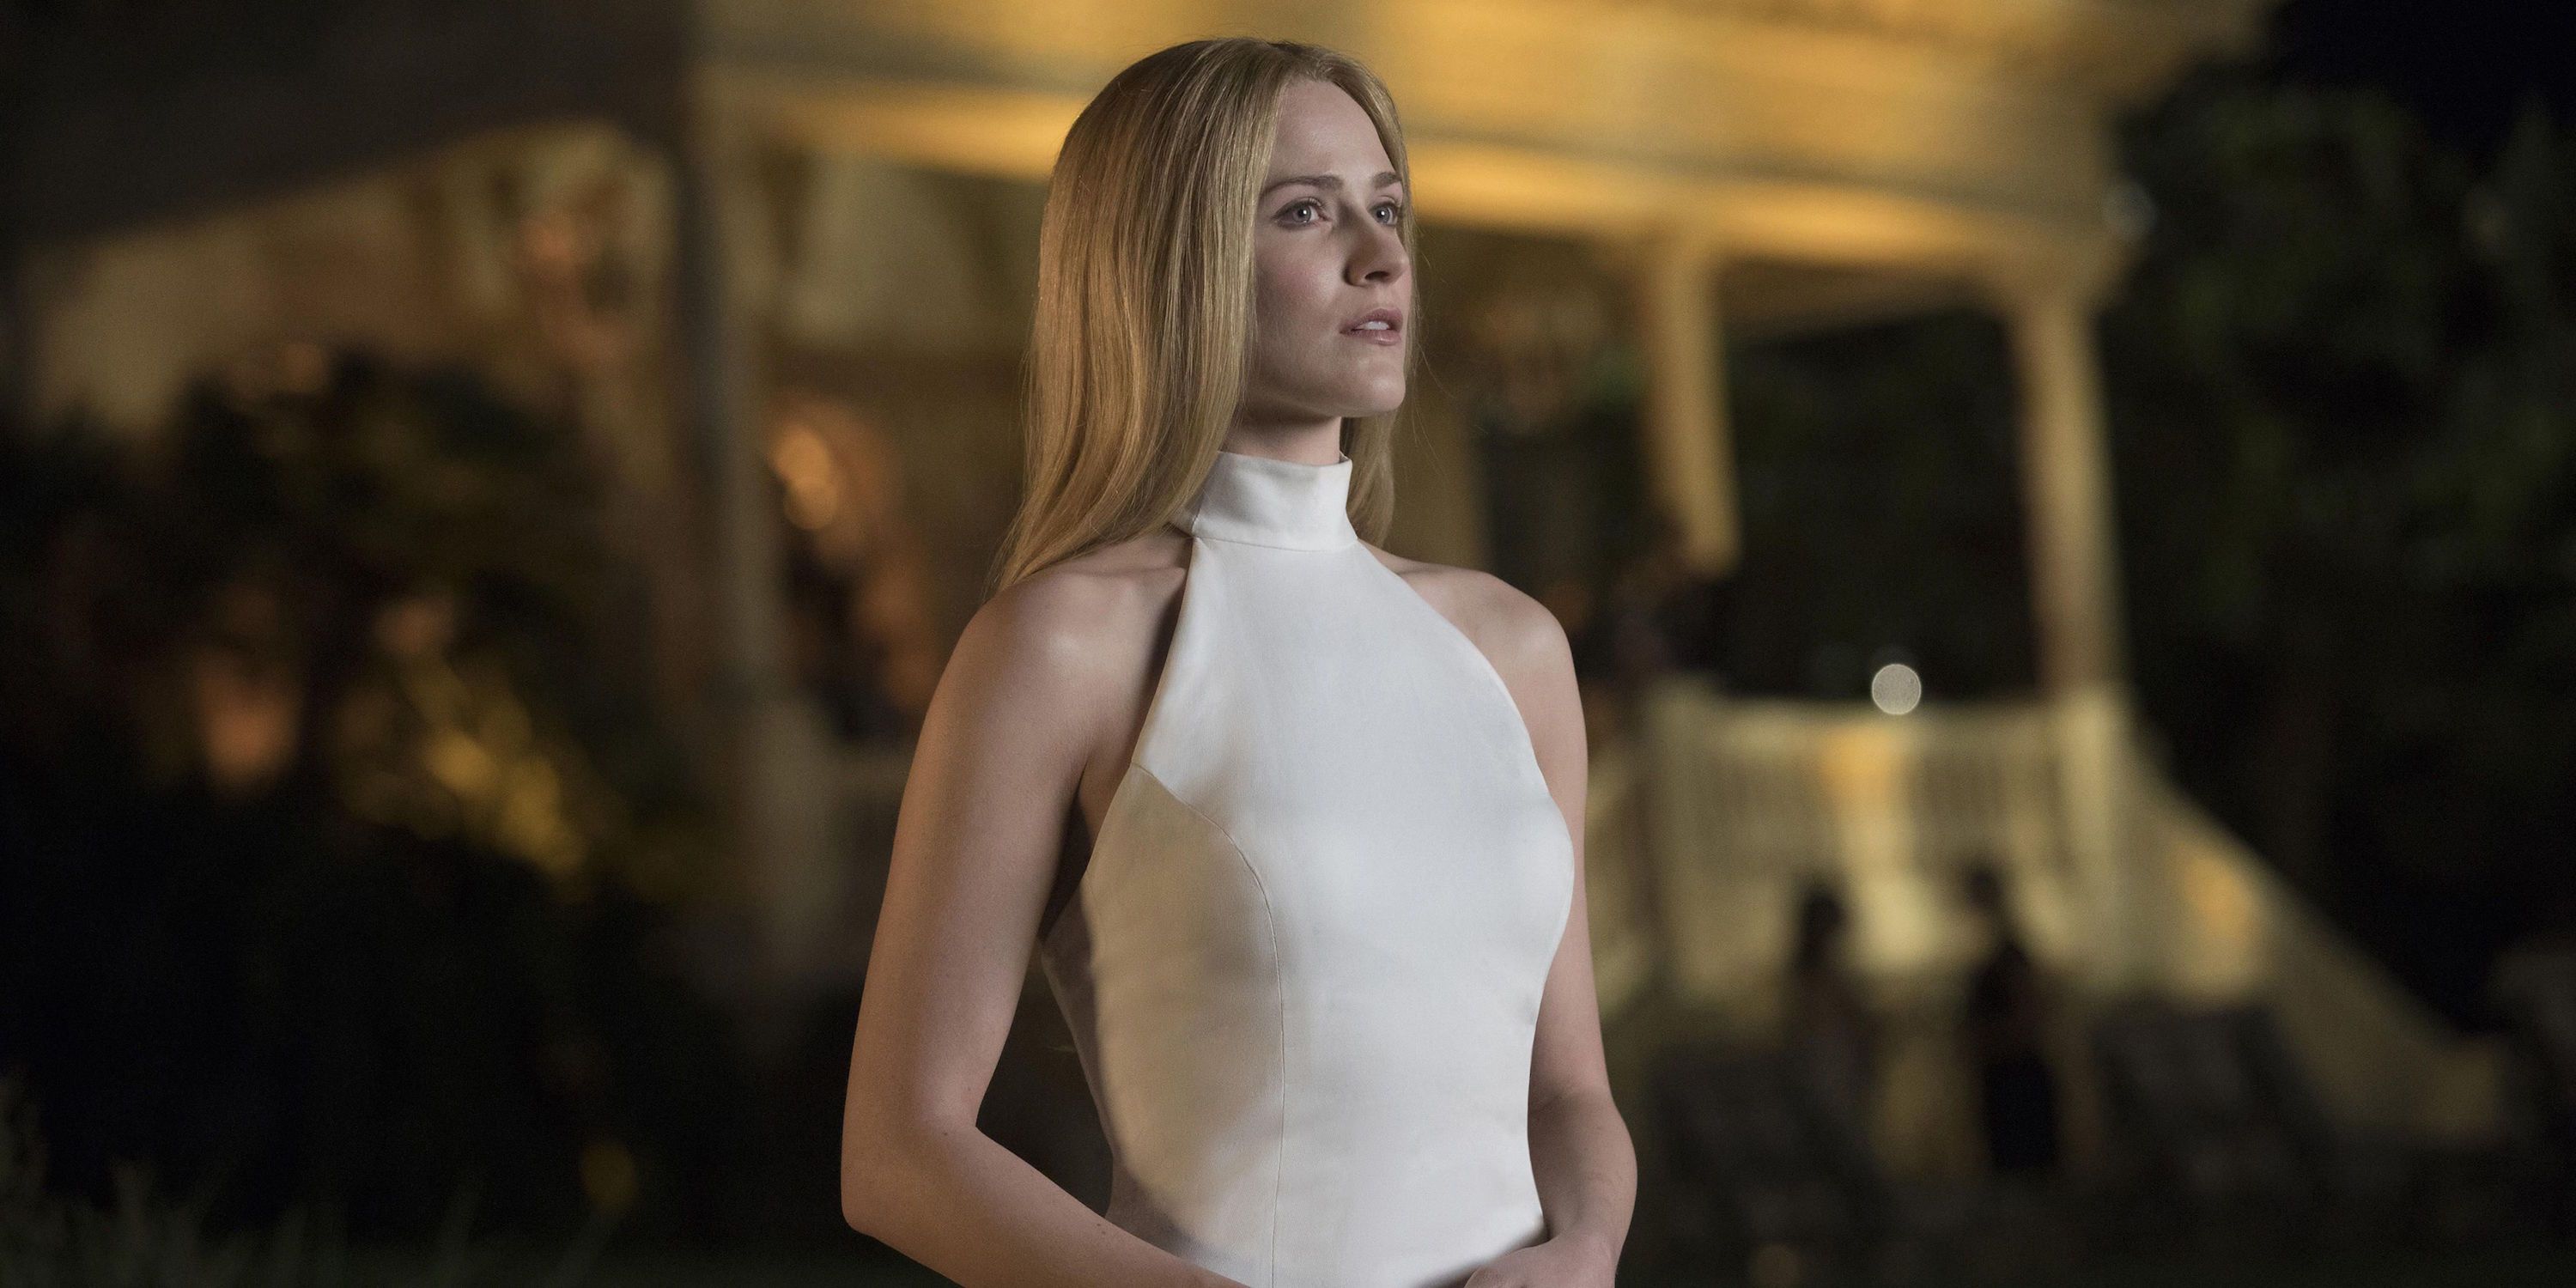 Westworld Season 3 Officially Ordered by HBO